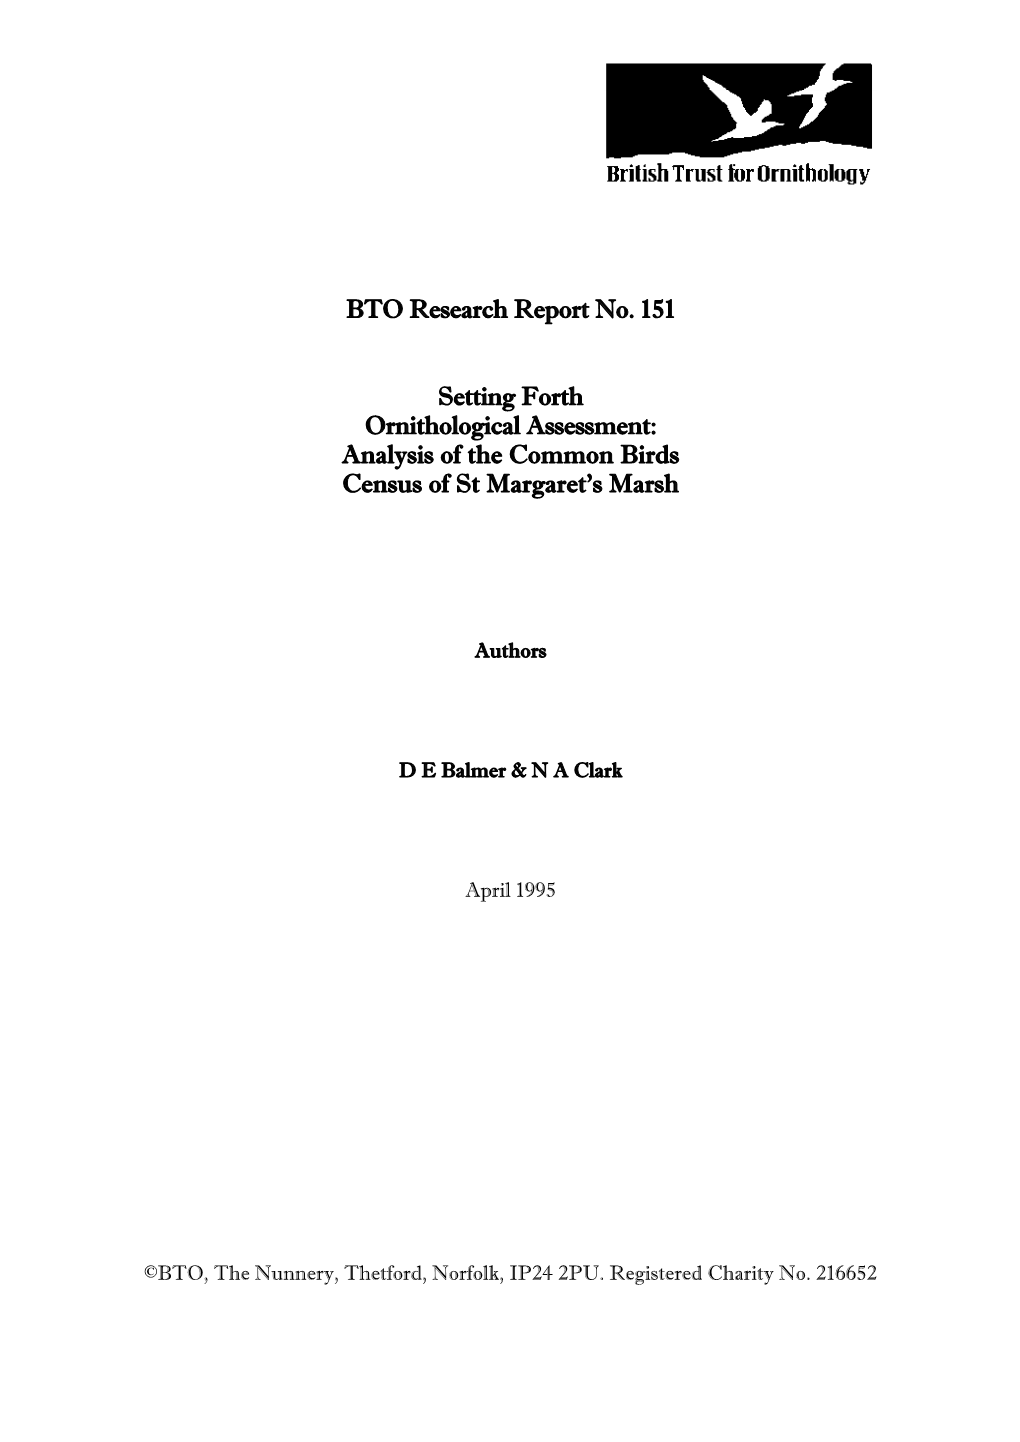 BTO Research Report No. 151 Setting Forth Ornithological Assessment